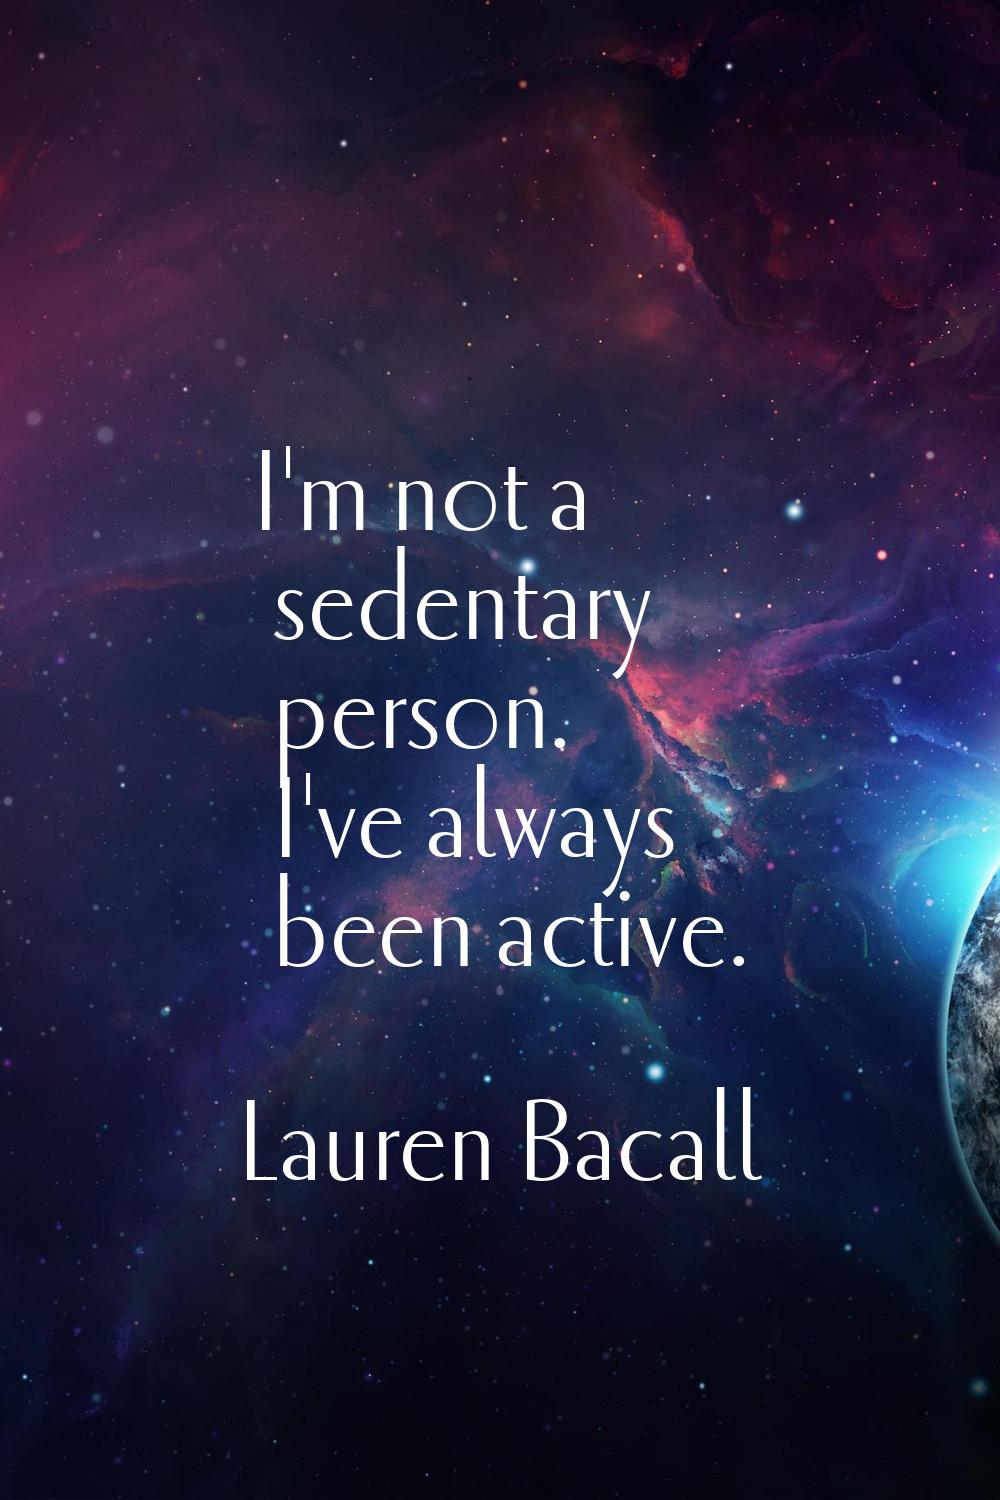 I'm not a sedentary person. I've always been active.